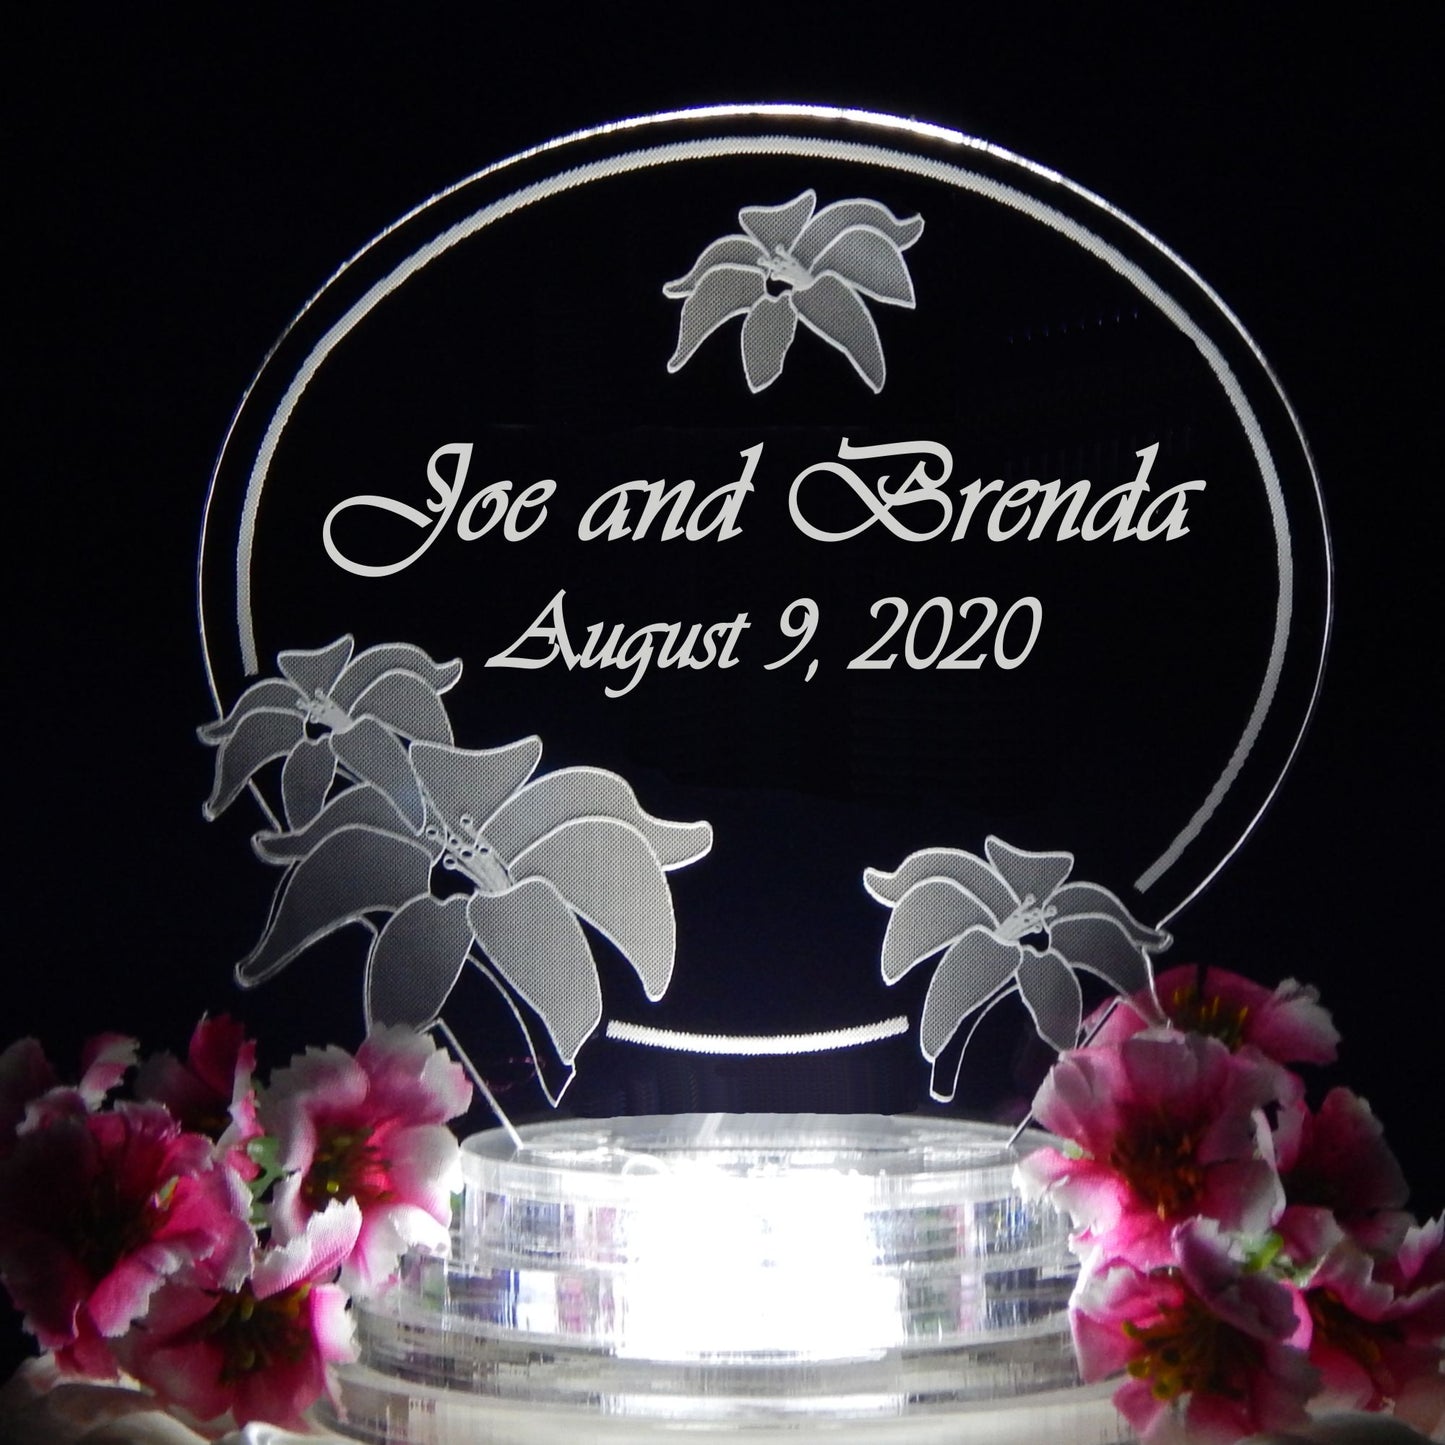 clear acrylic cake topper designed in a lily flower theme engraved with names and date